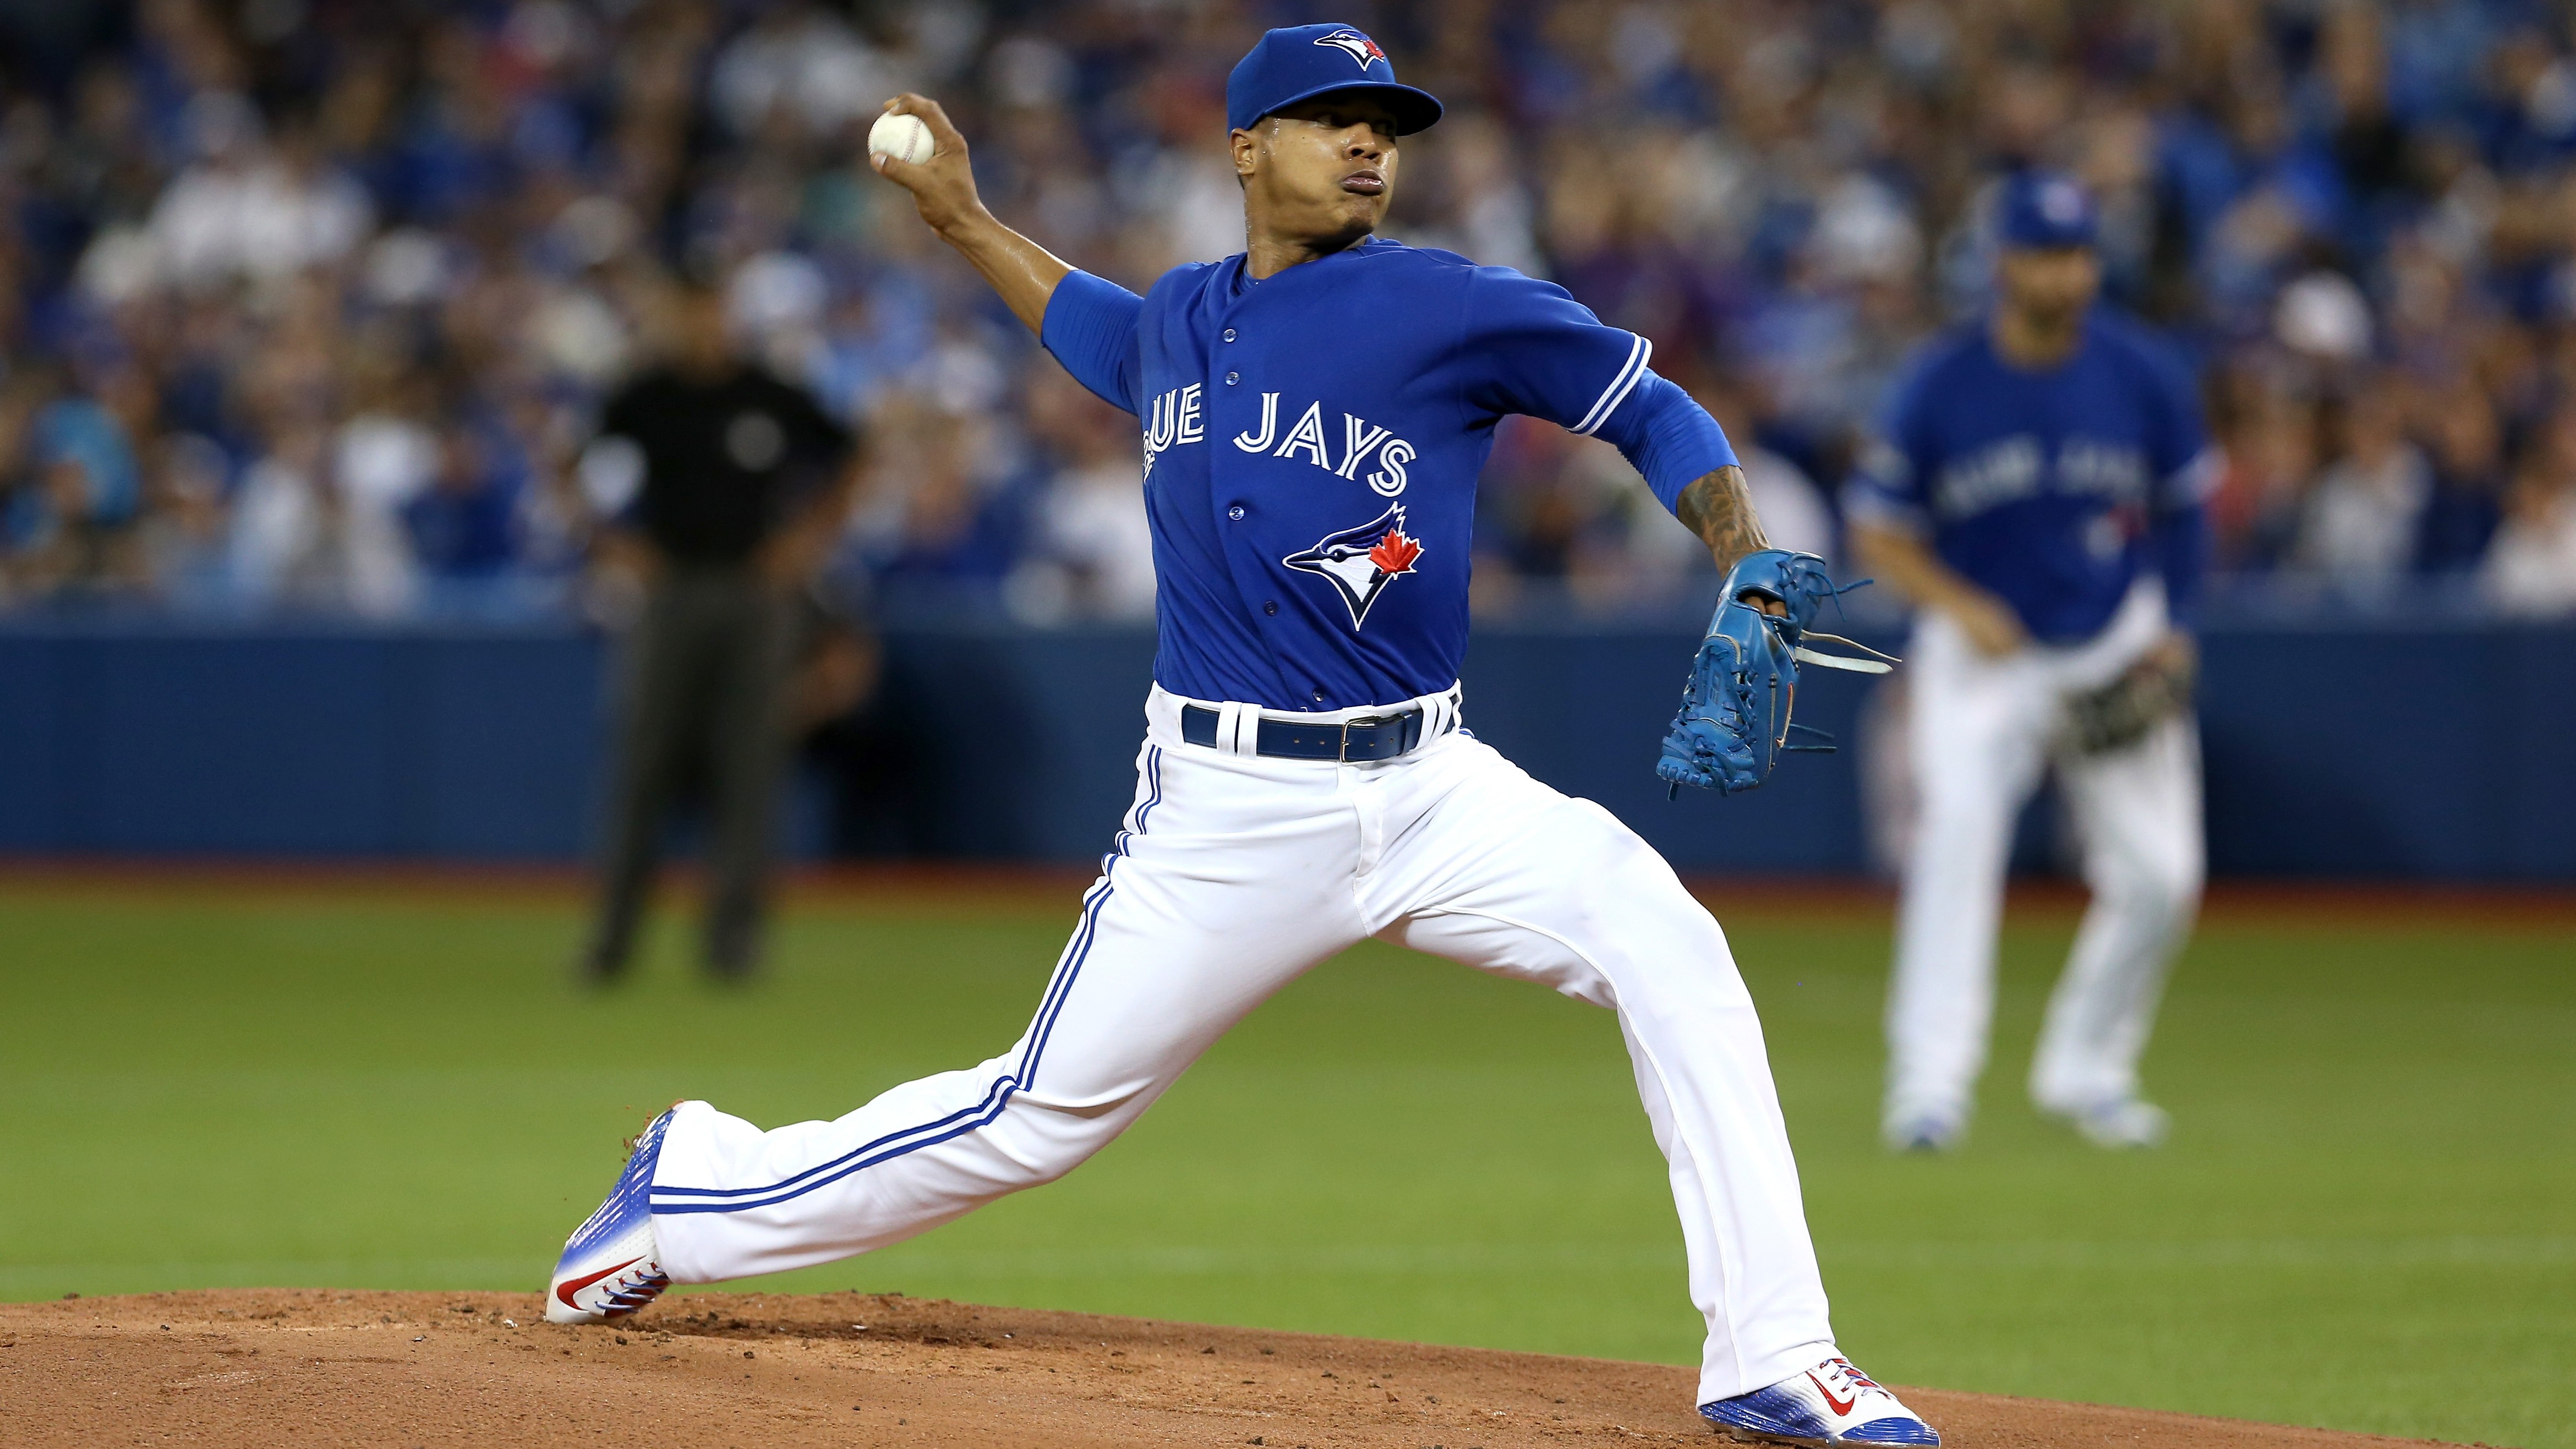 Marcus Stroman, Blue Jays Pitcher: 5 Fast Facts You Need to Know